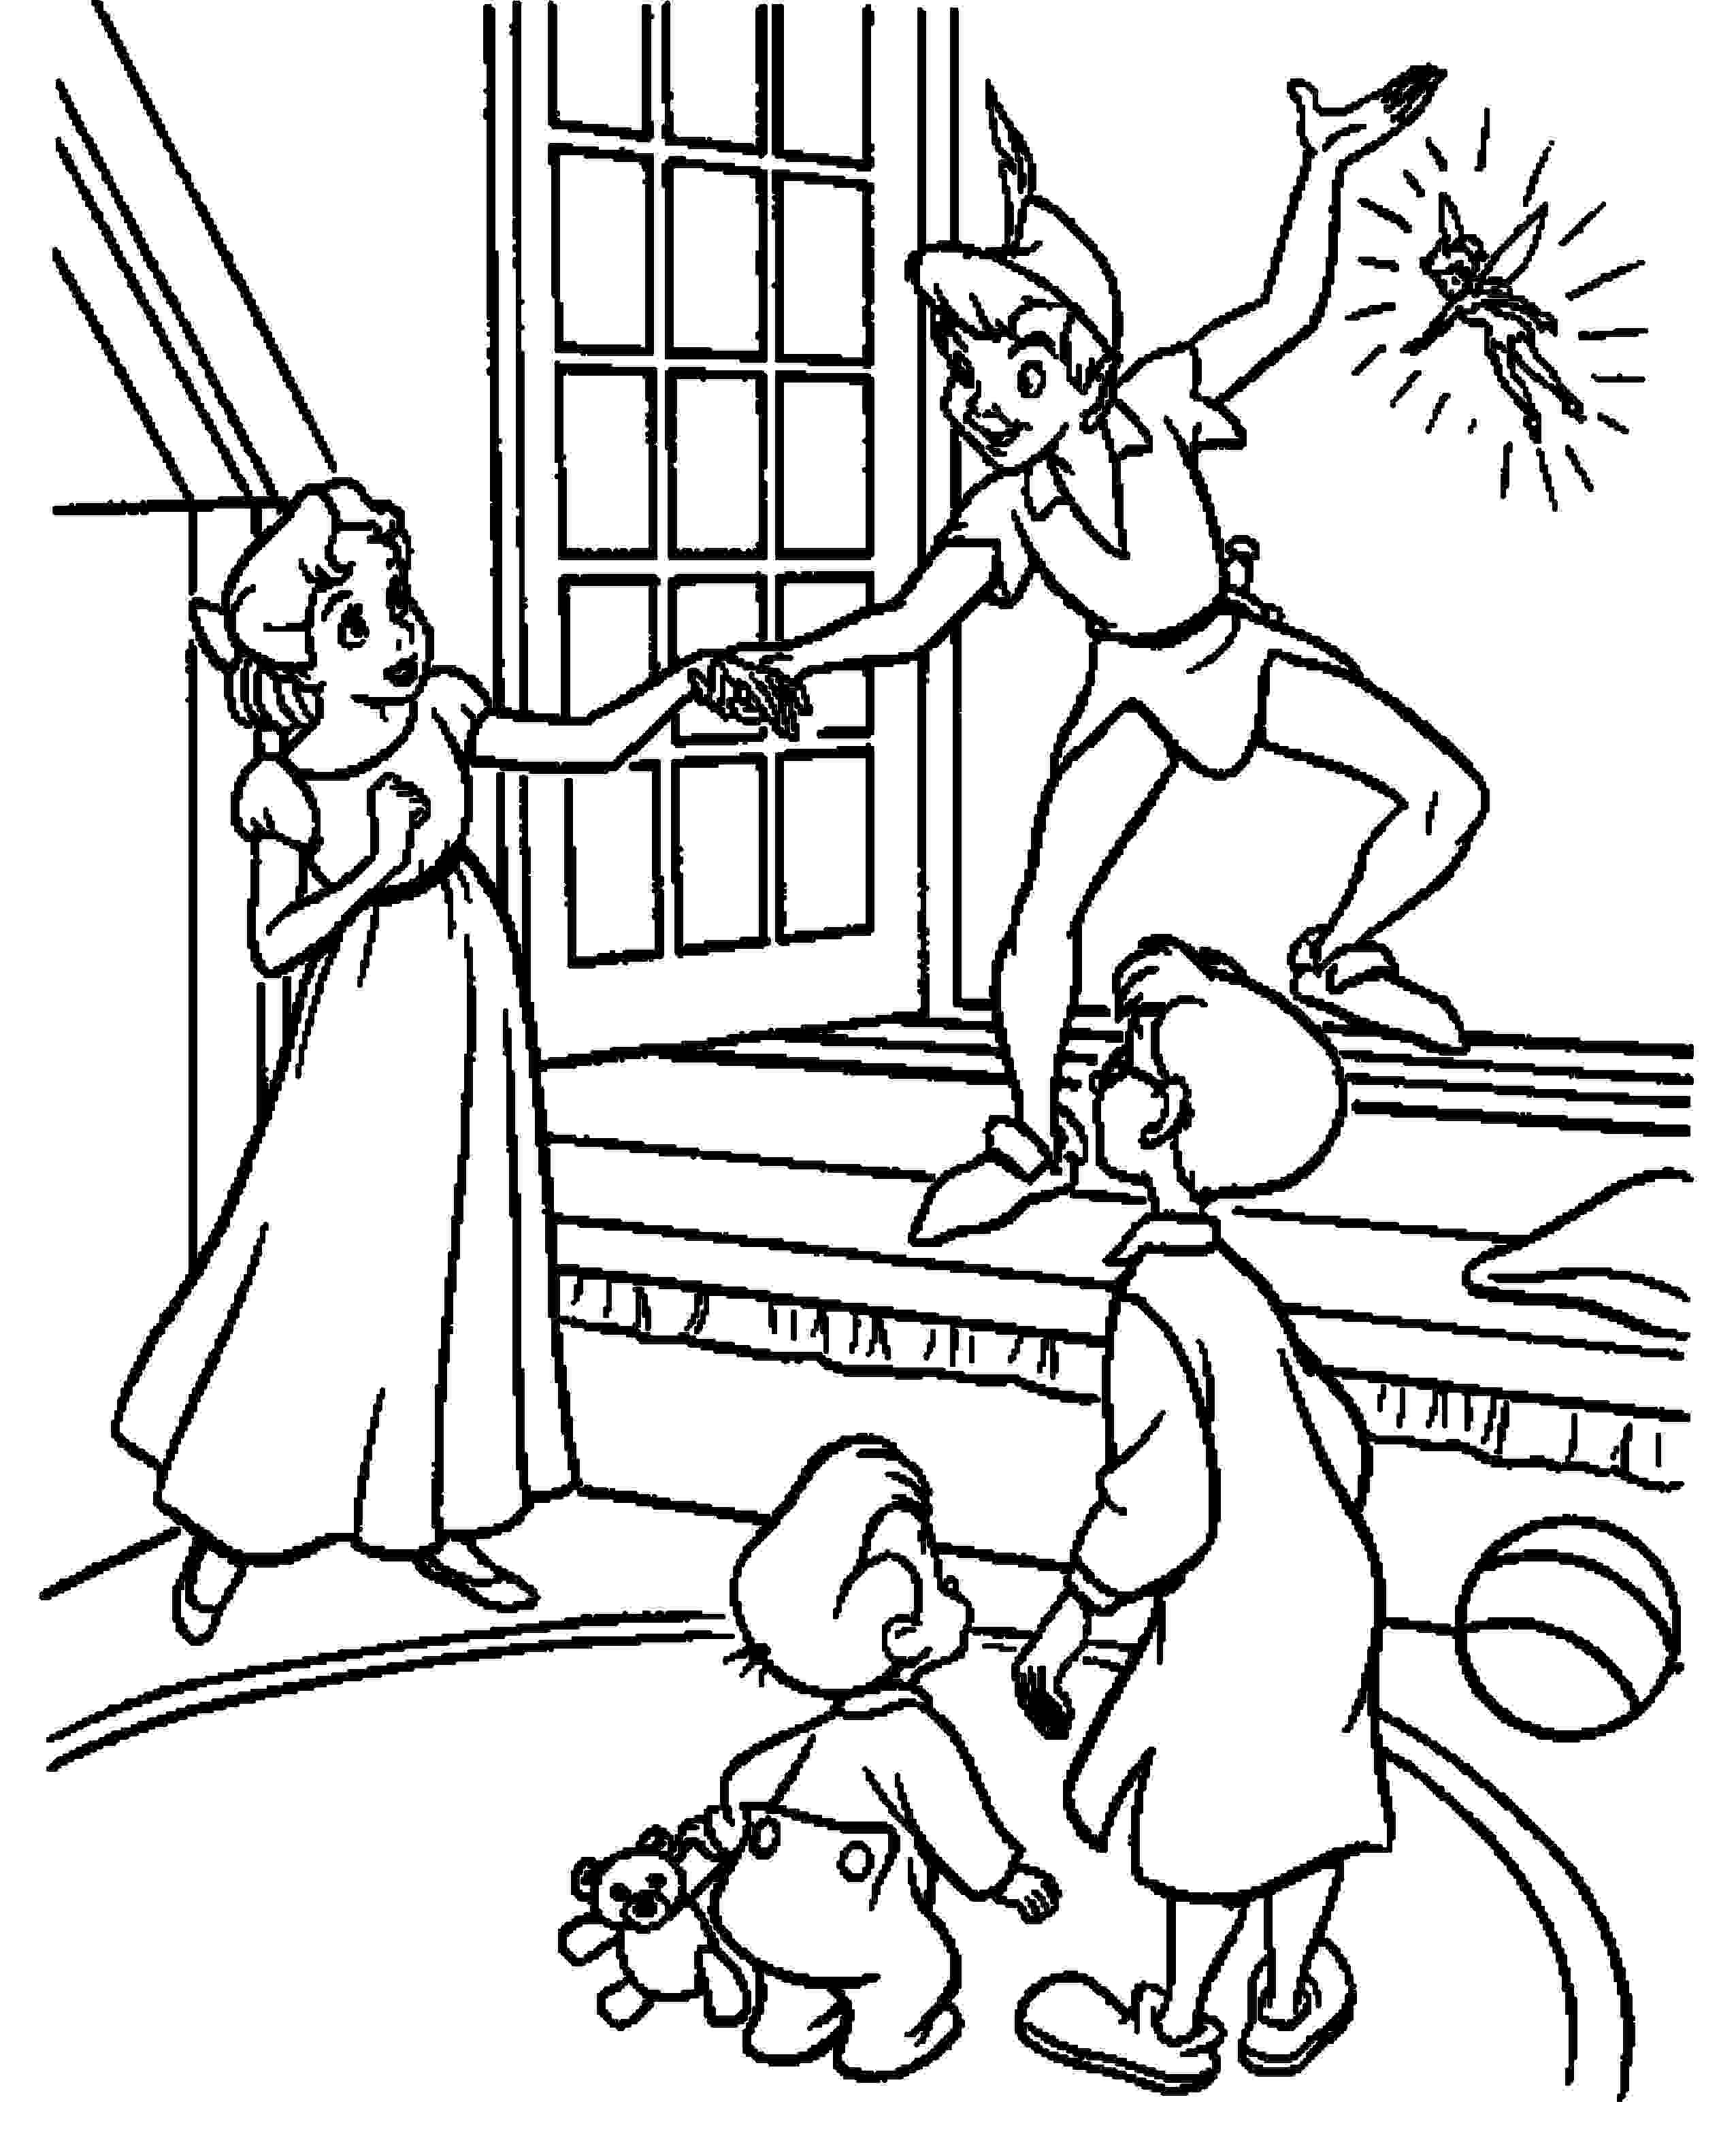 Print & Download Fun Peter Pan Coloring Pages Downloaded for Free